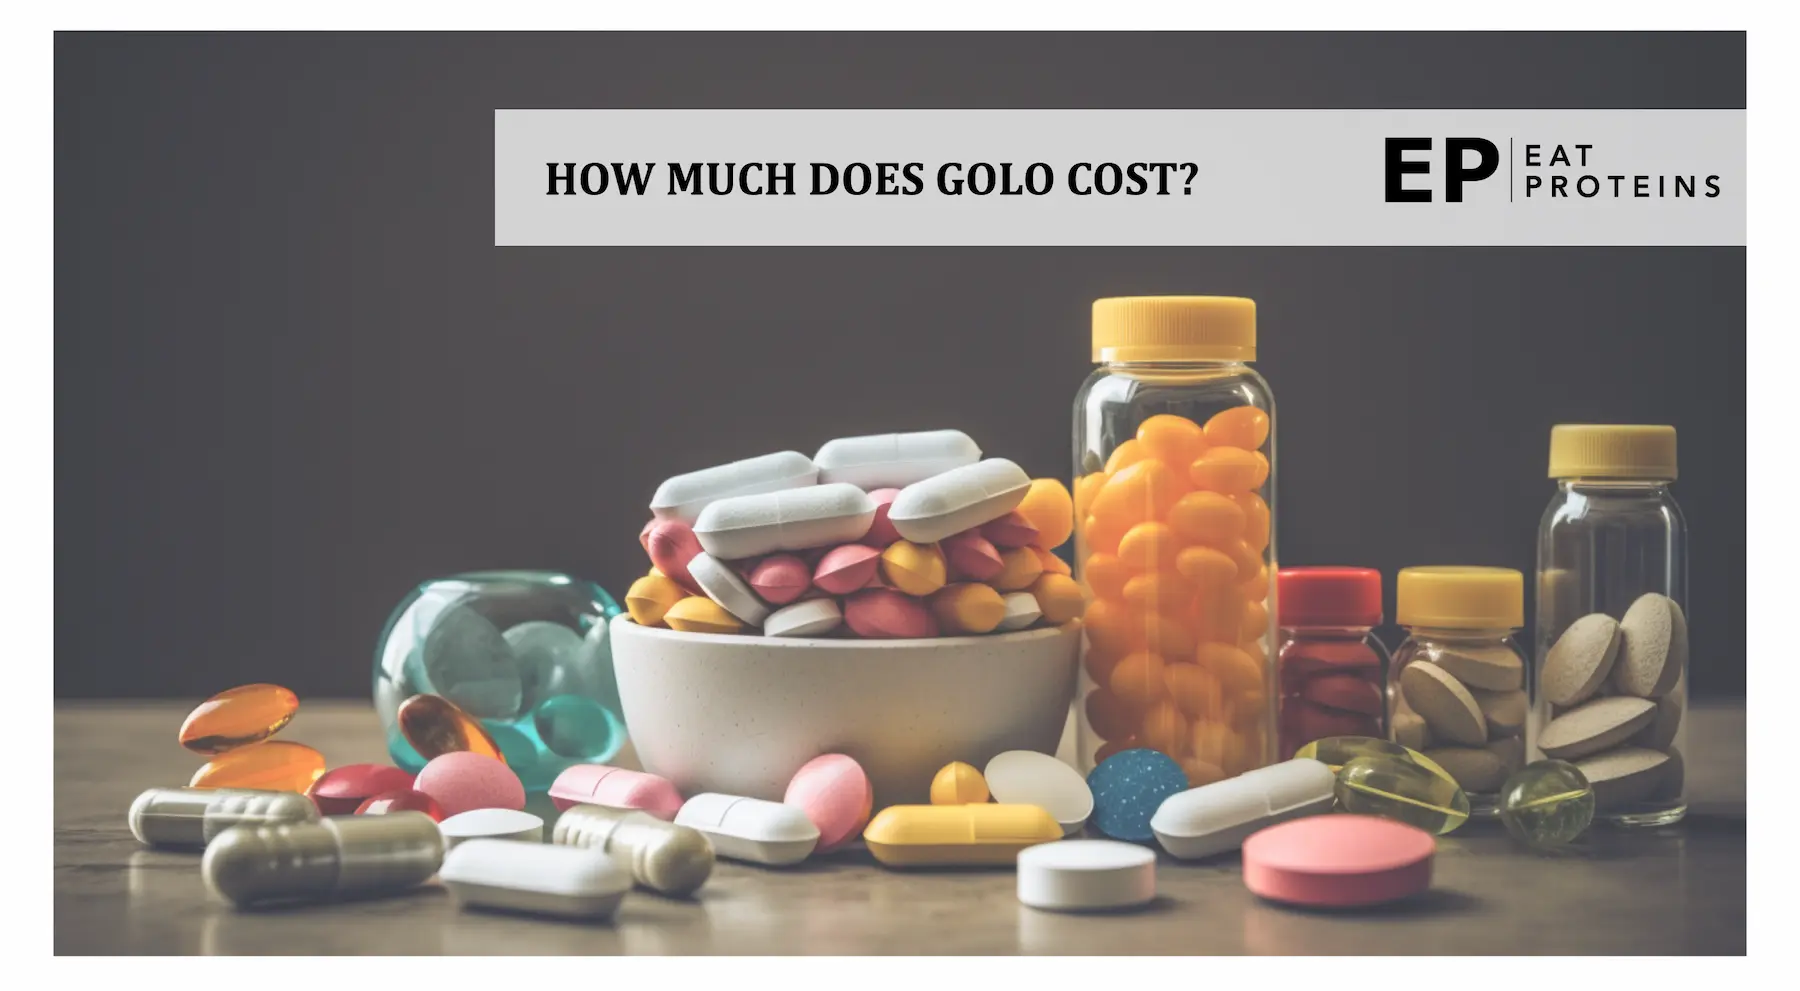 what is the price for GOLO diet?